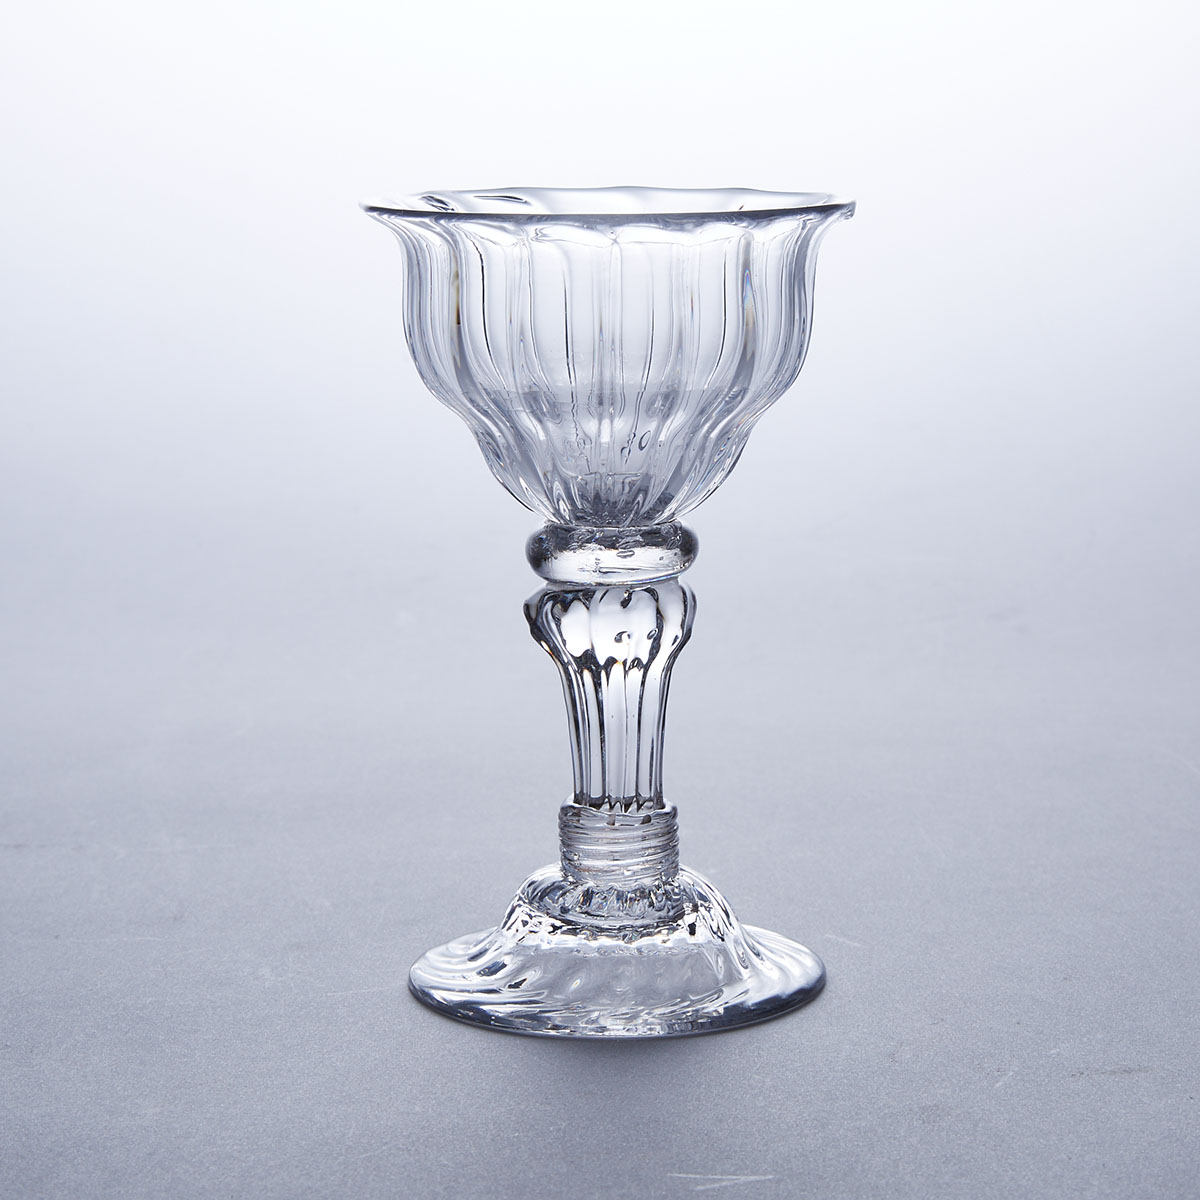 English Teared Knopped Moulded Pedestal Stemmed Sweetmeat or Champagne Glass, mid-18th century